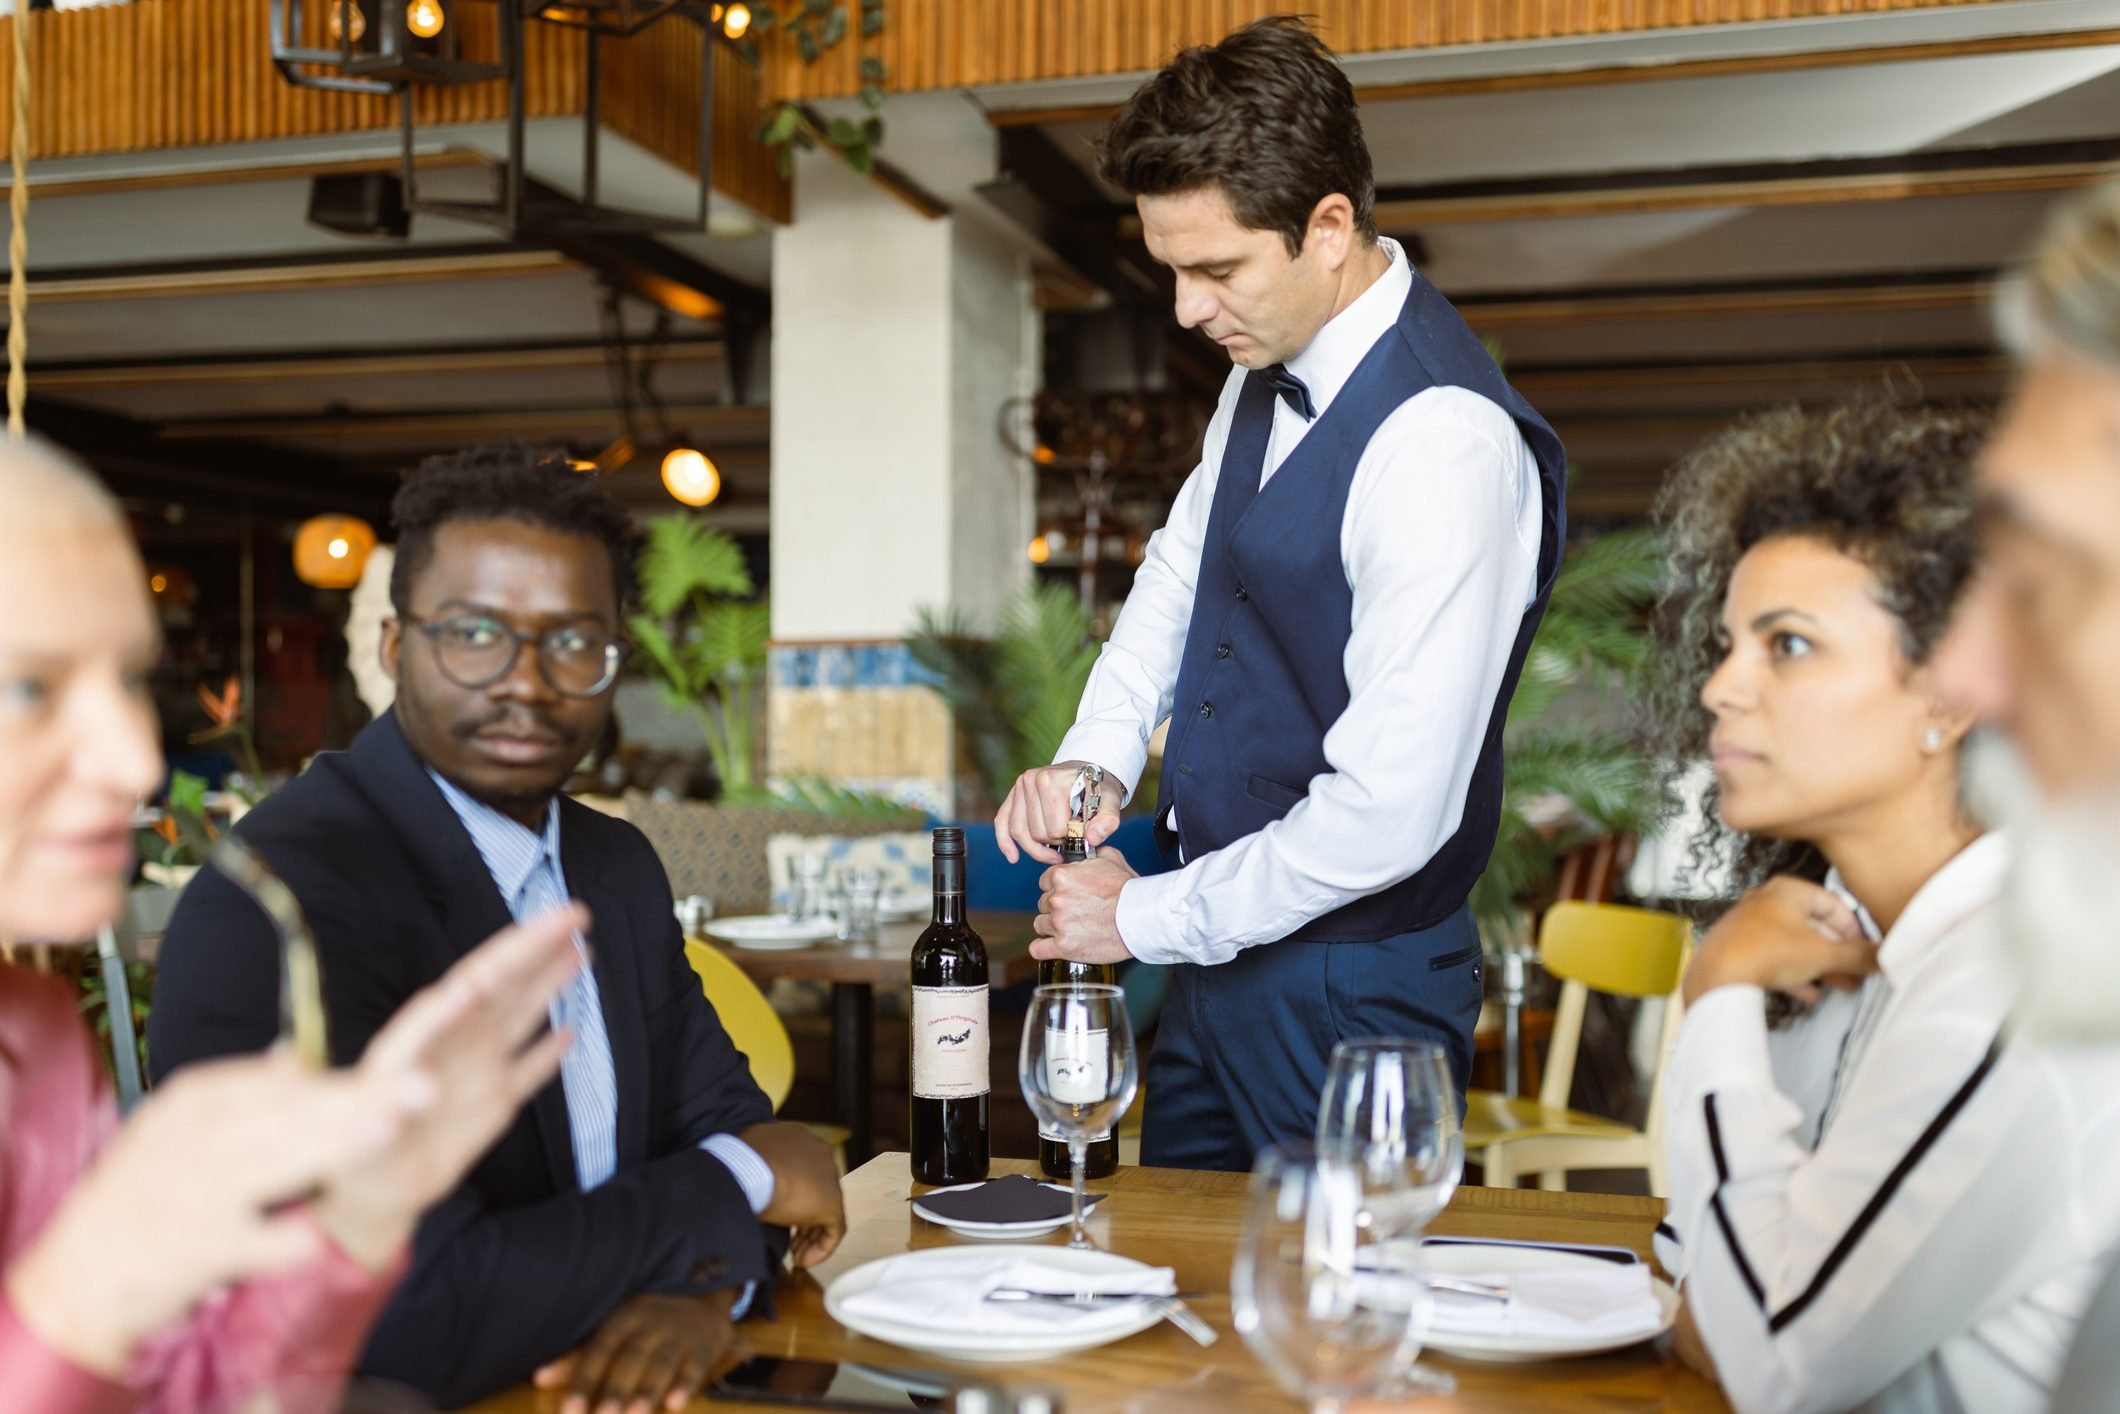 Training your wait staff is the best way to get Google reviews